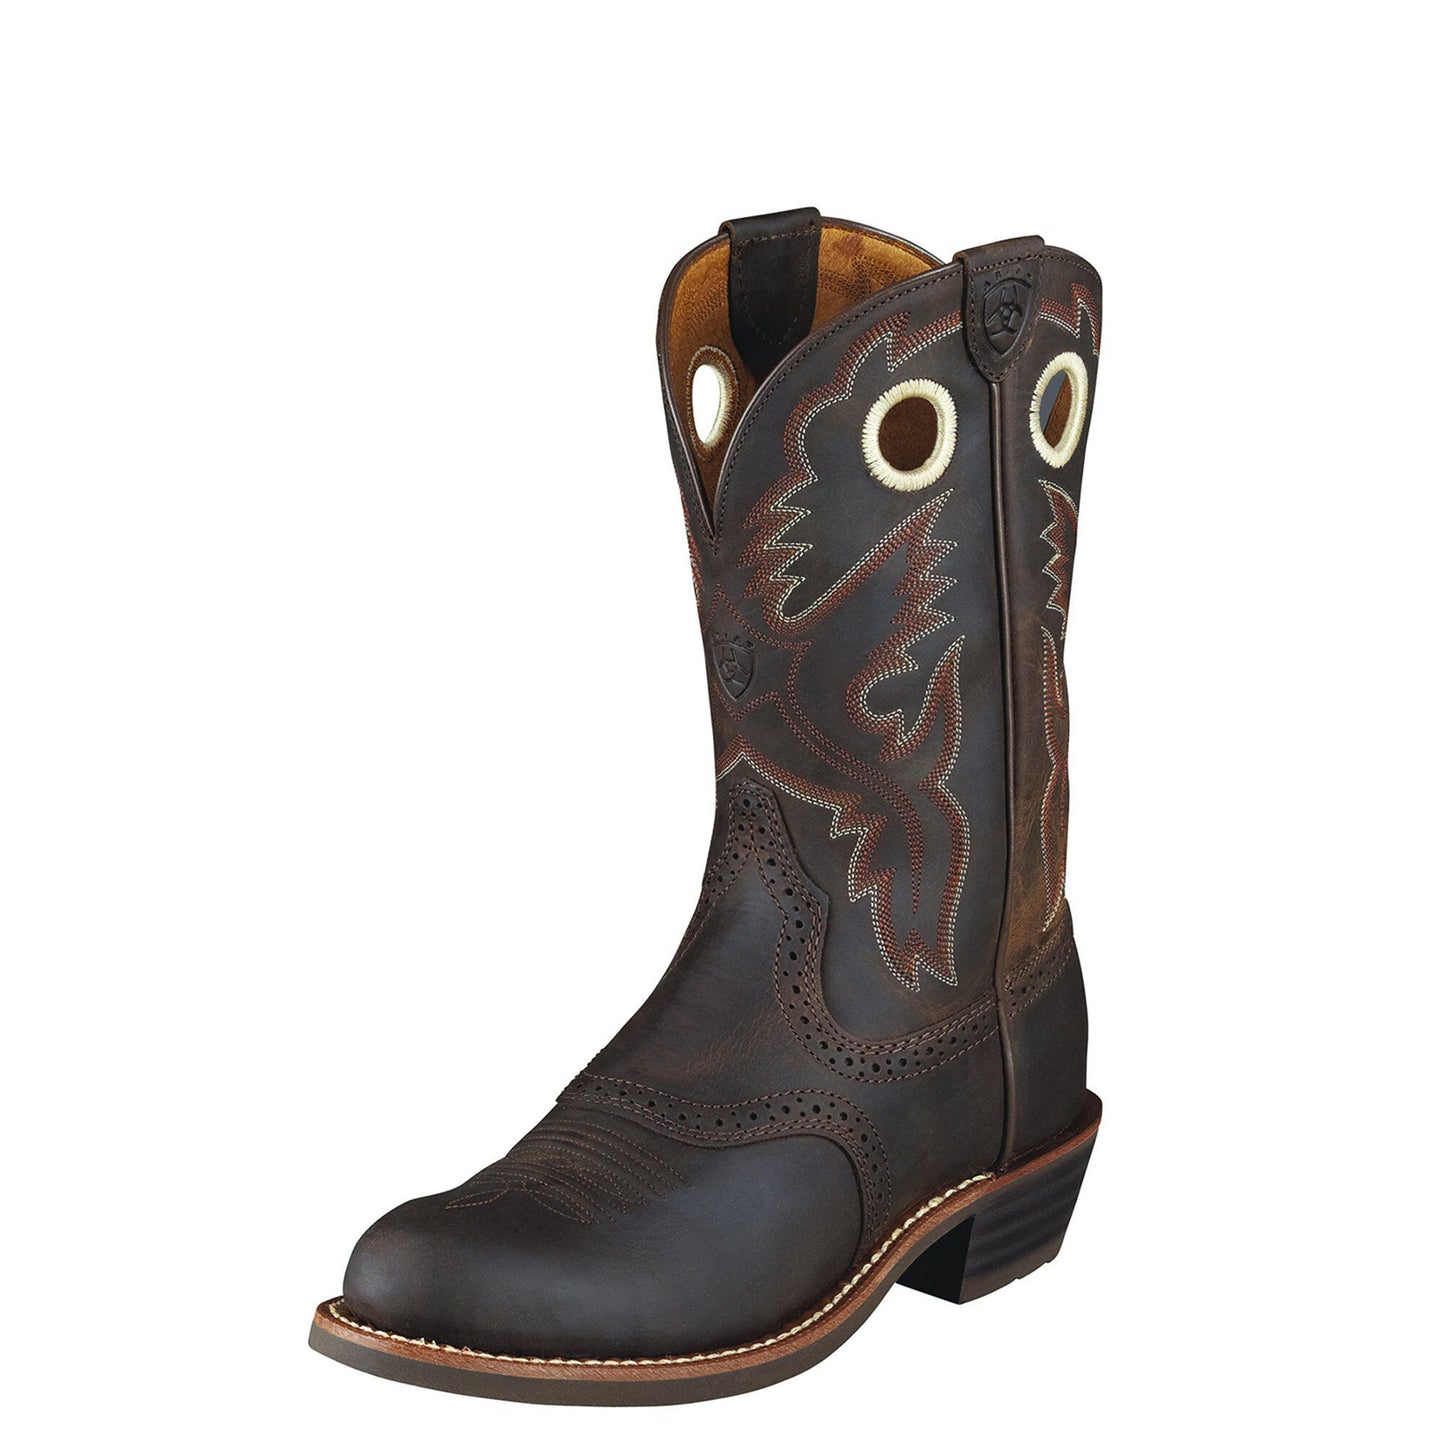 Ariat Women's Heritage Roughstock Boot - Antique Brown - French's Boots